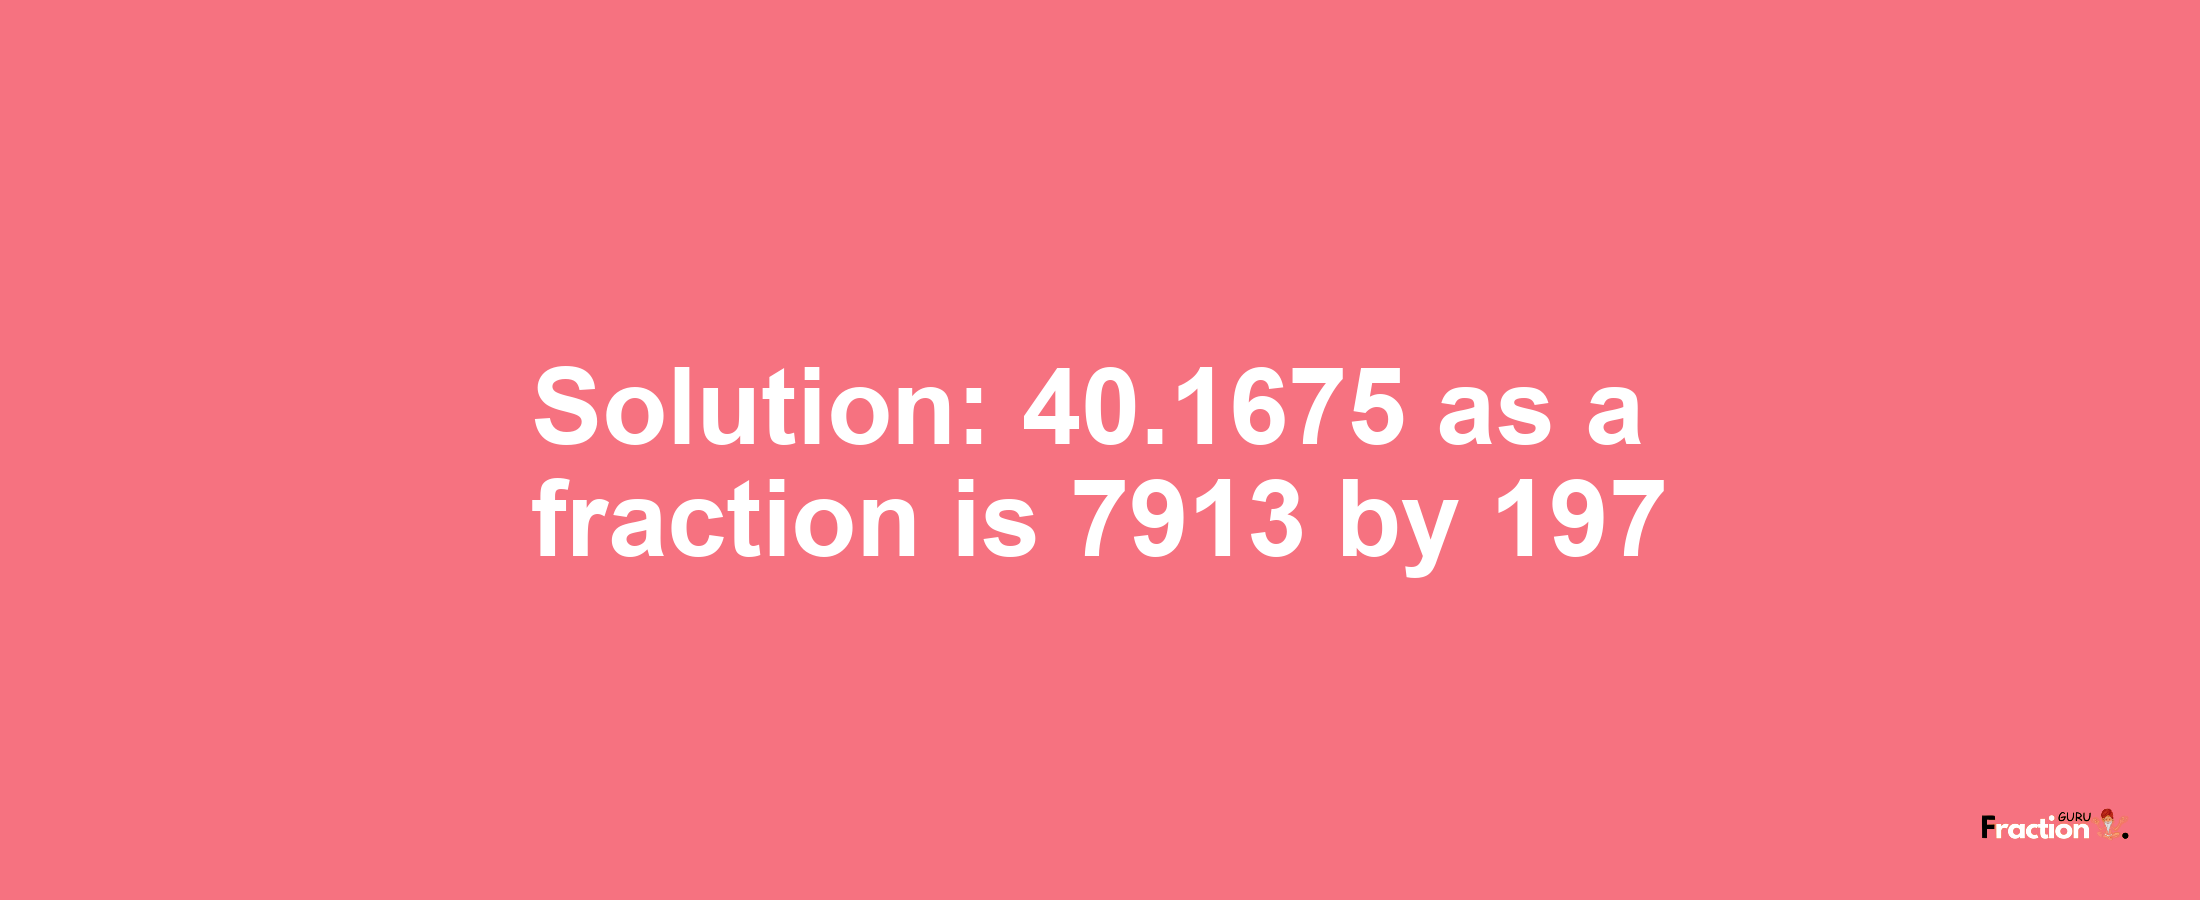 Solution:40.1675 as a fraction is 7913/197